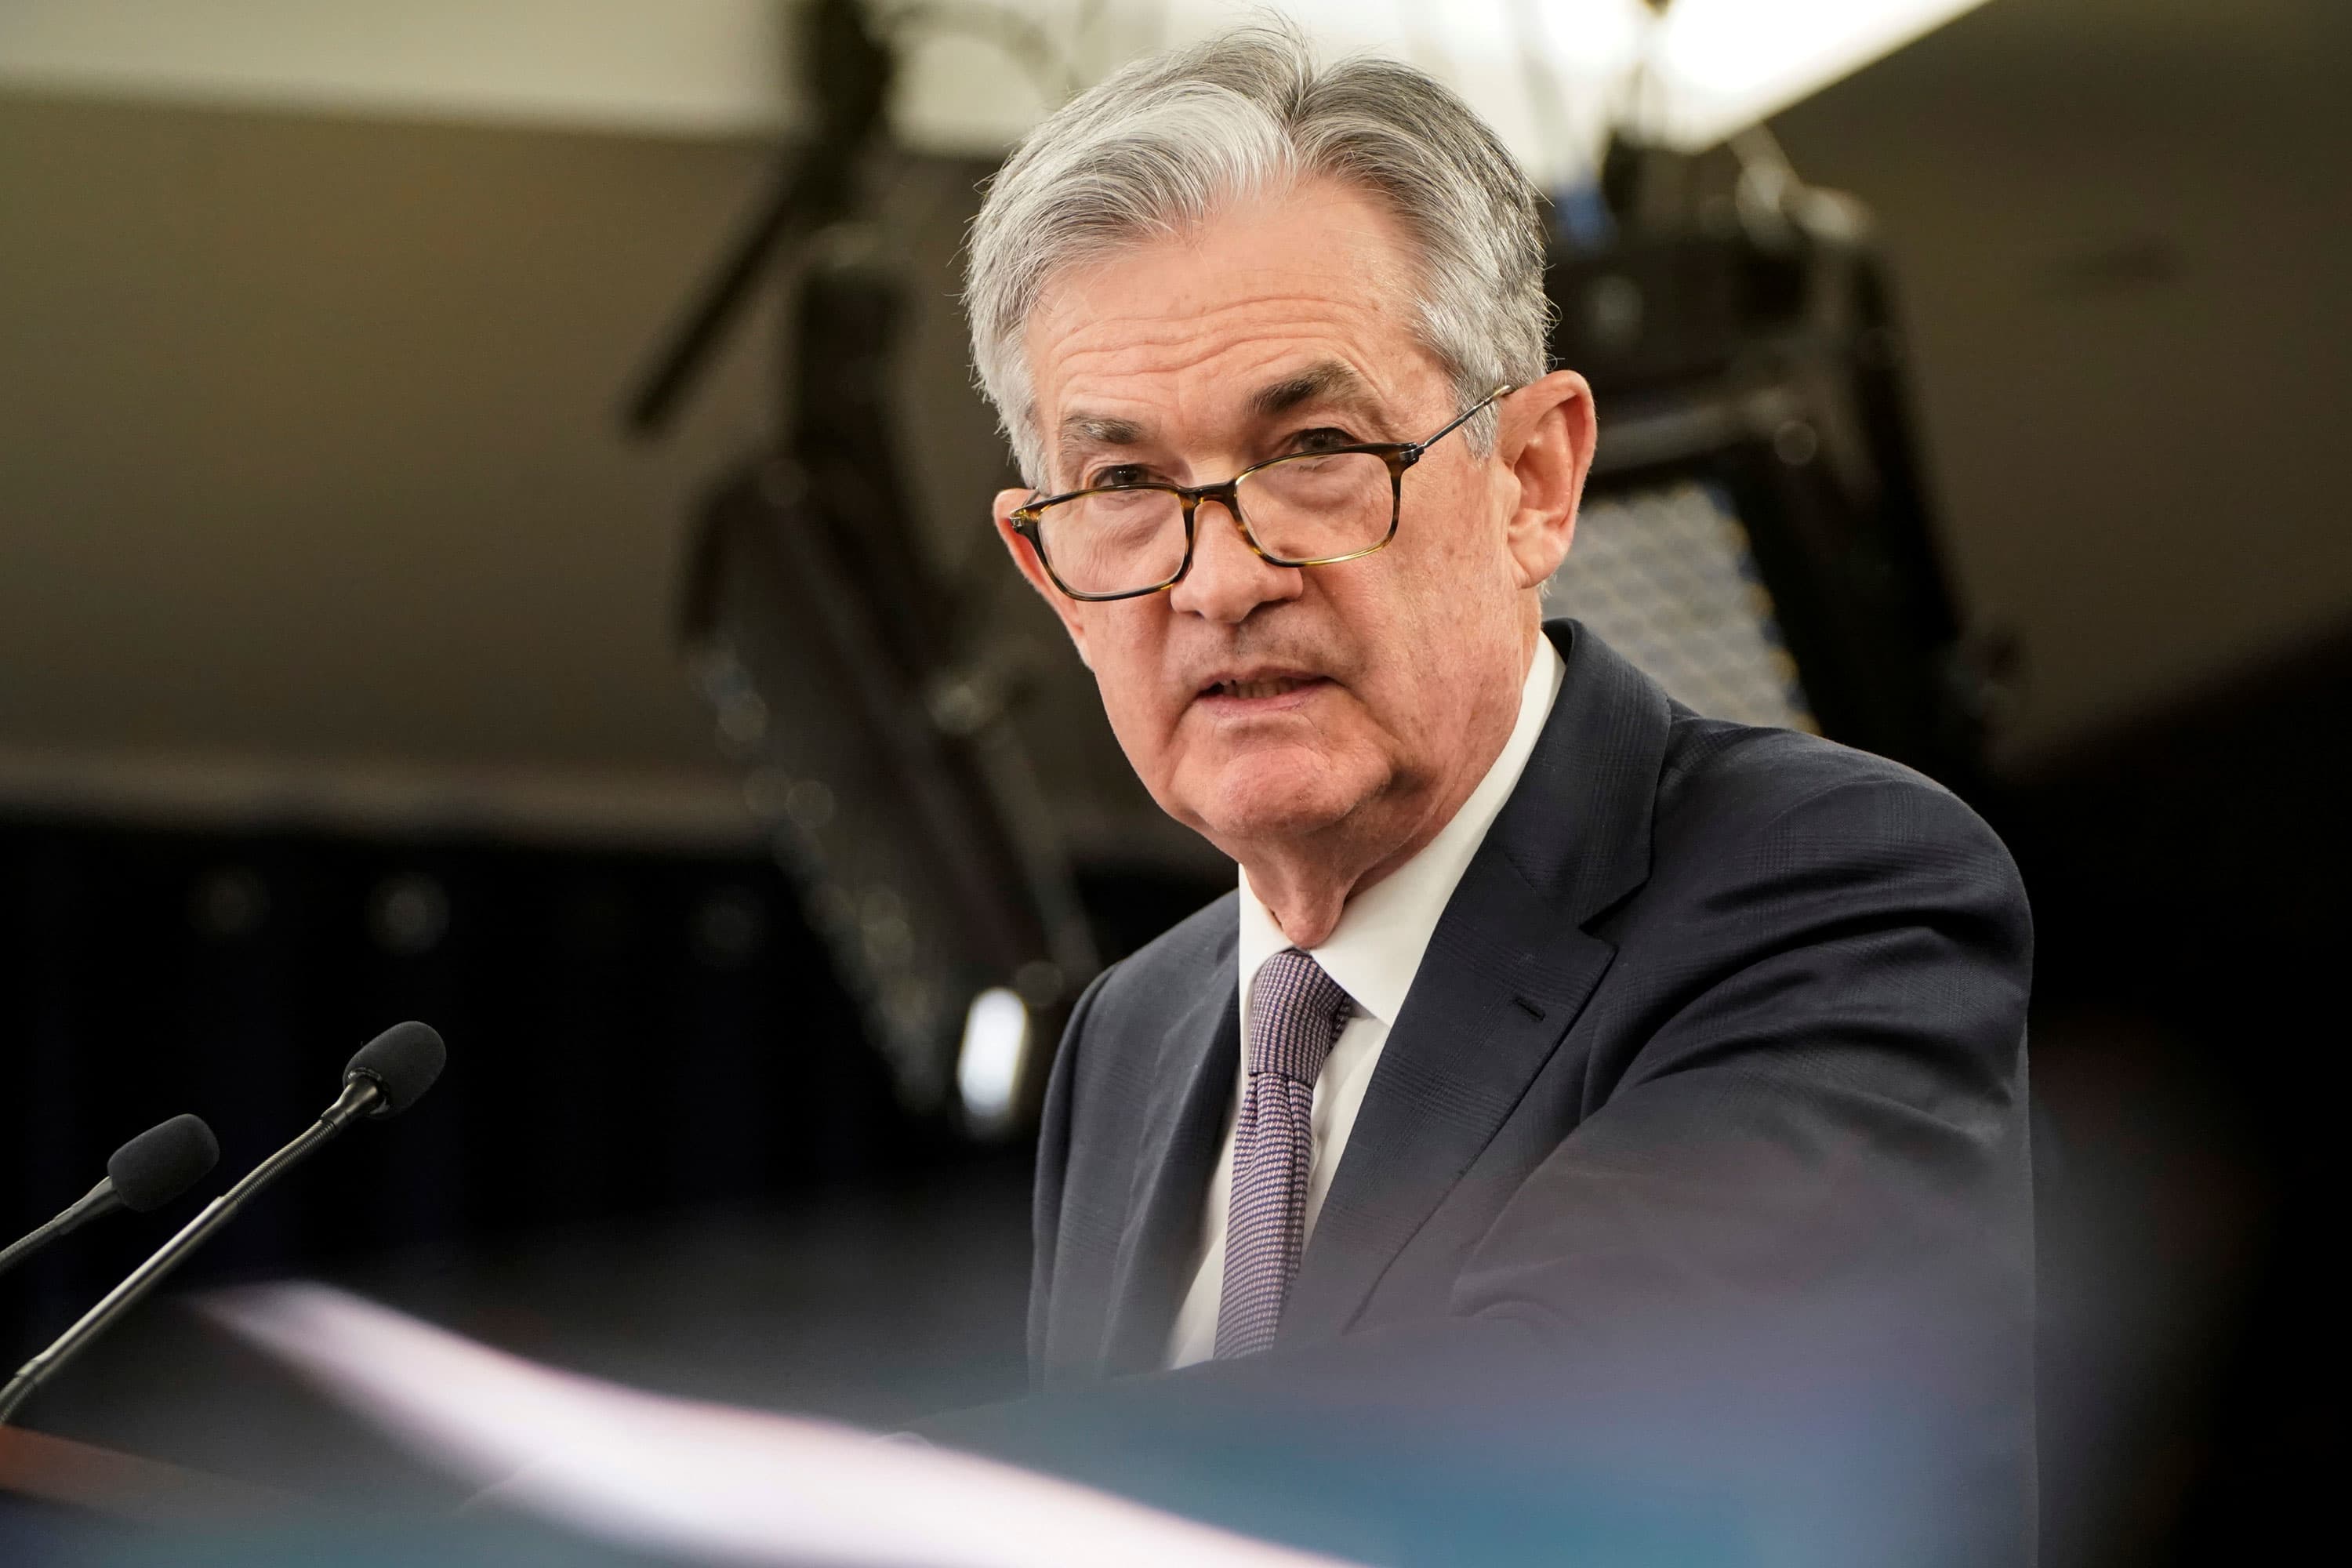 The Fed is committed to using all of its tools to promote recovery